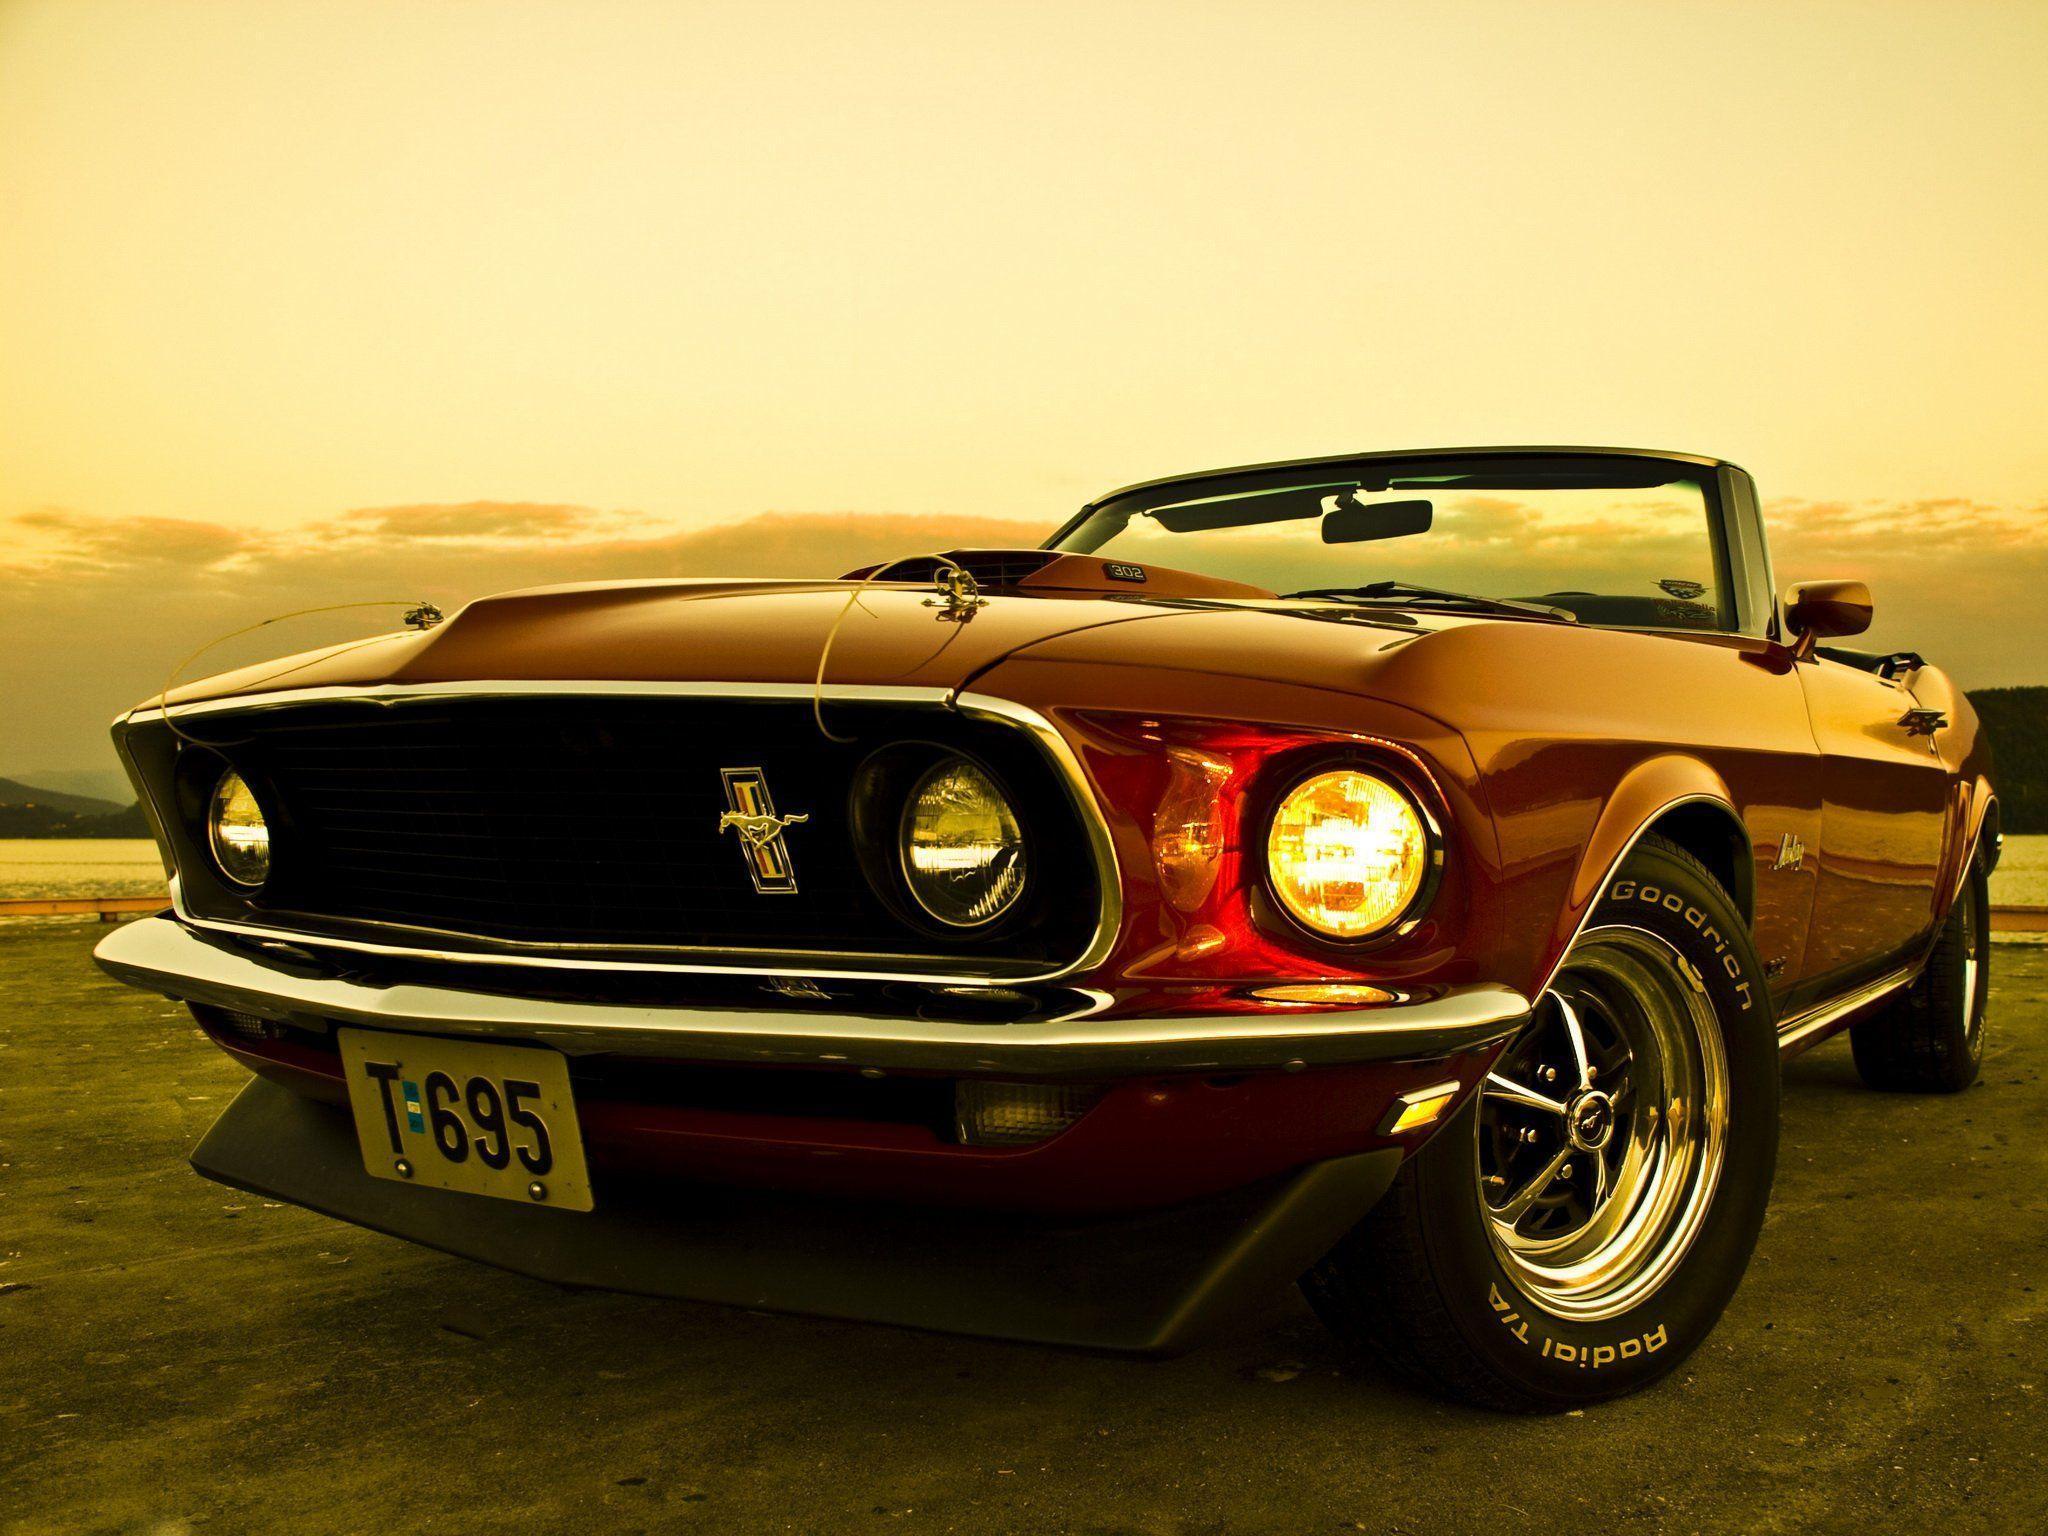 Check out this wallpaper for your iPhone  httpzedgenetw9670359srciosv25 via Zed  Mustang iphone wallpaper  Mustang wallpaper Iphone wallpaper for guys